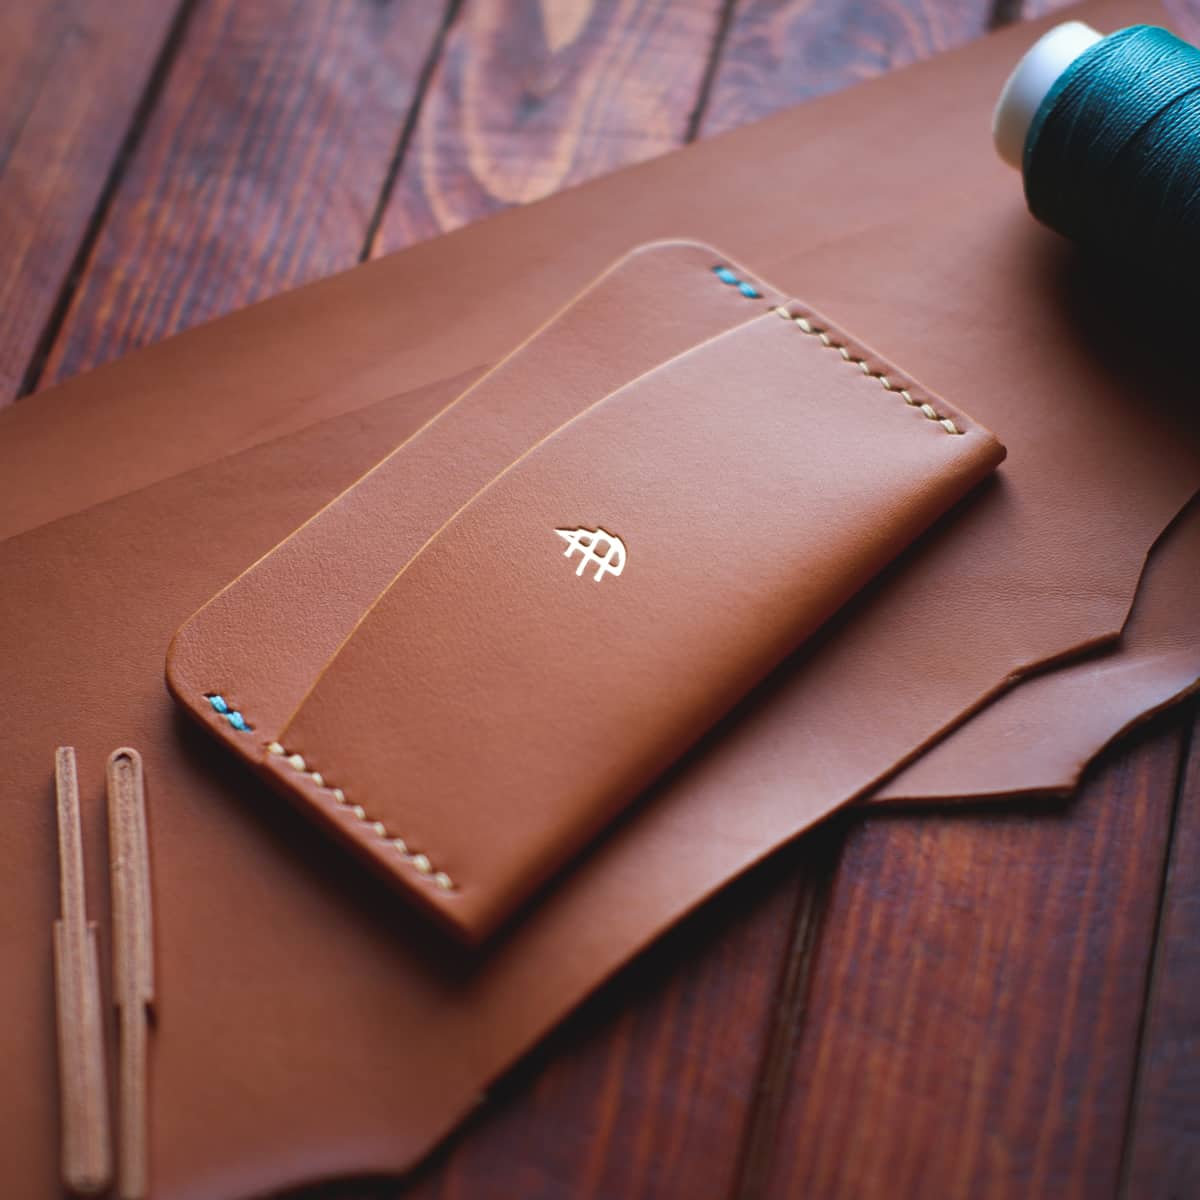 Tabletop view of The Mountain Card Holder in light brown aniline vegetable tanned leather